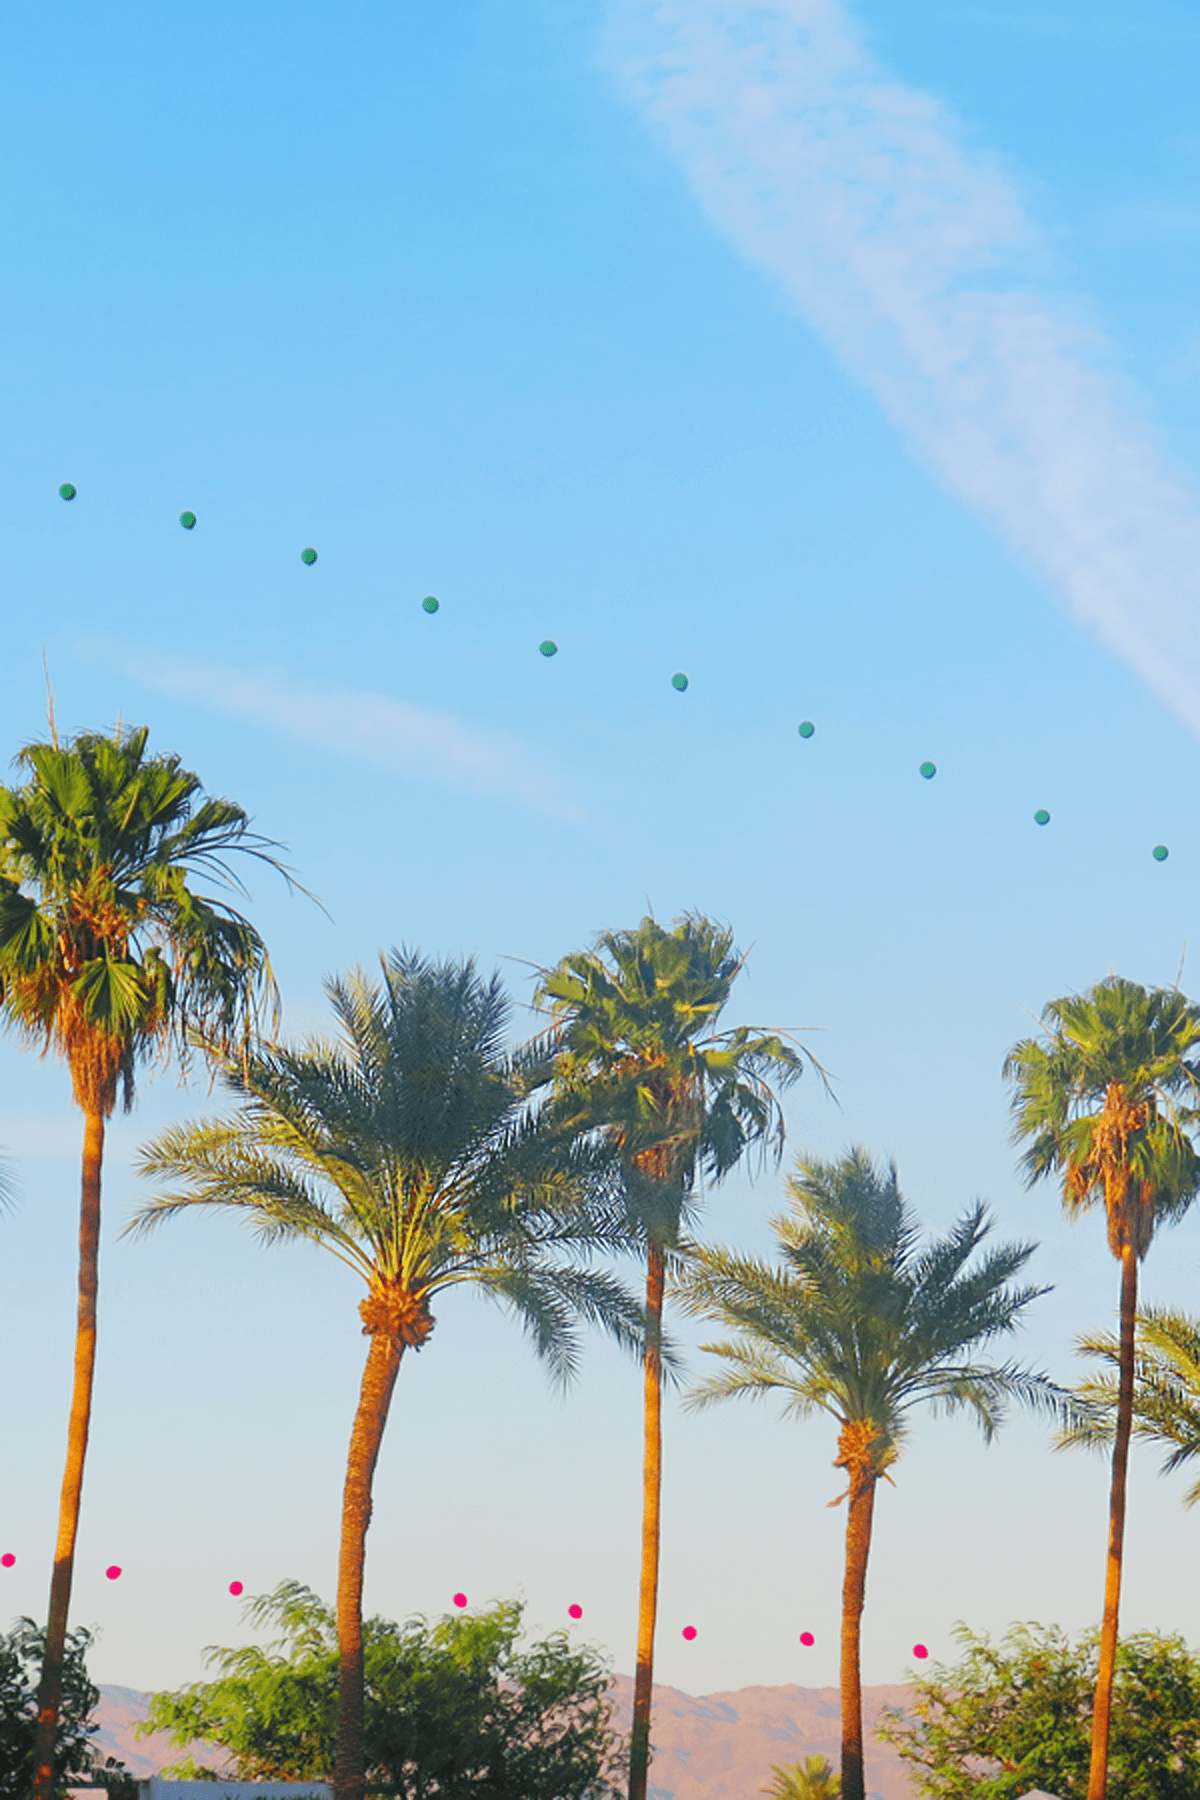 Prep for long days & chill nights under Coachella's famous palm